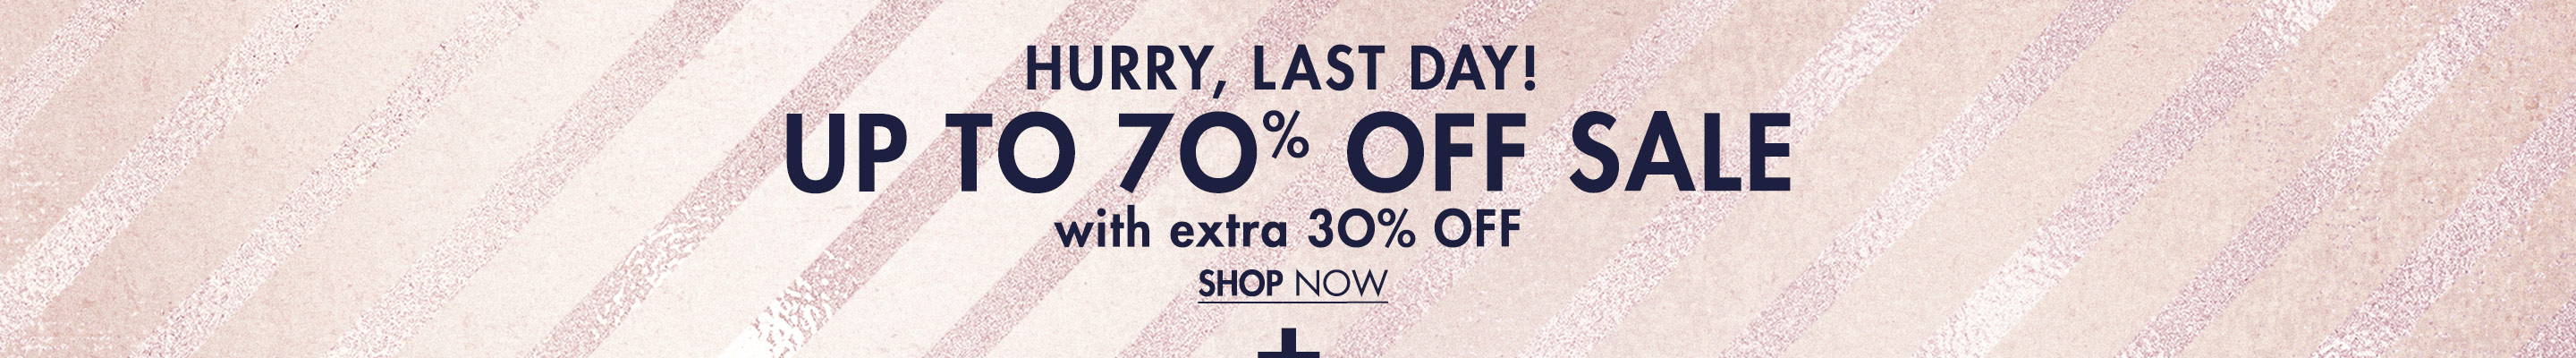 Up to 70% Off Sale